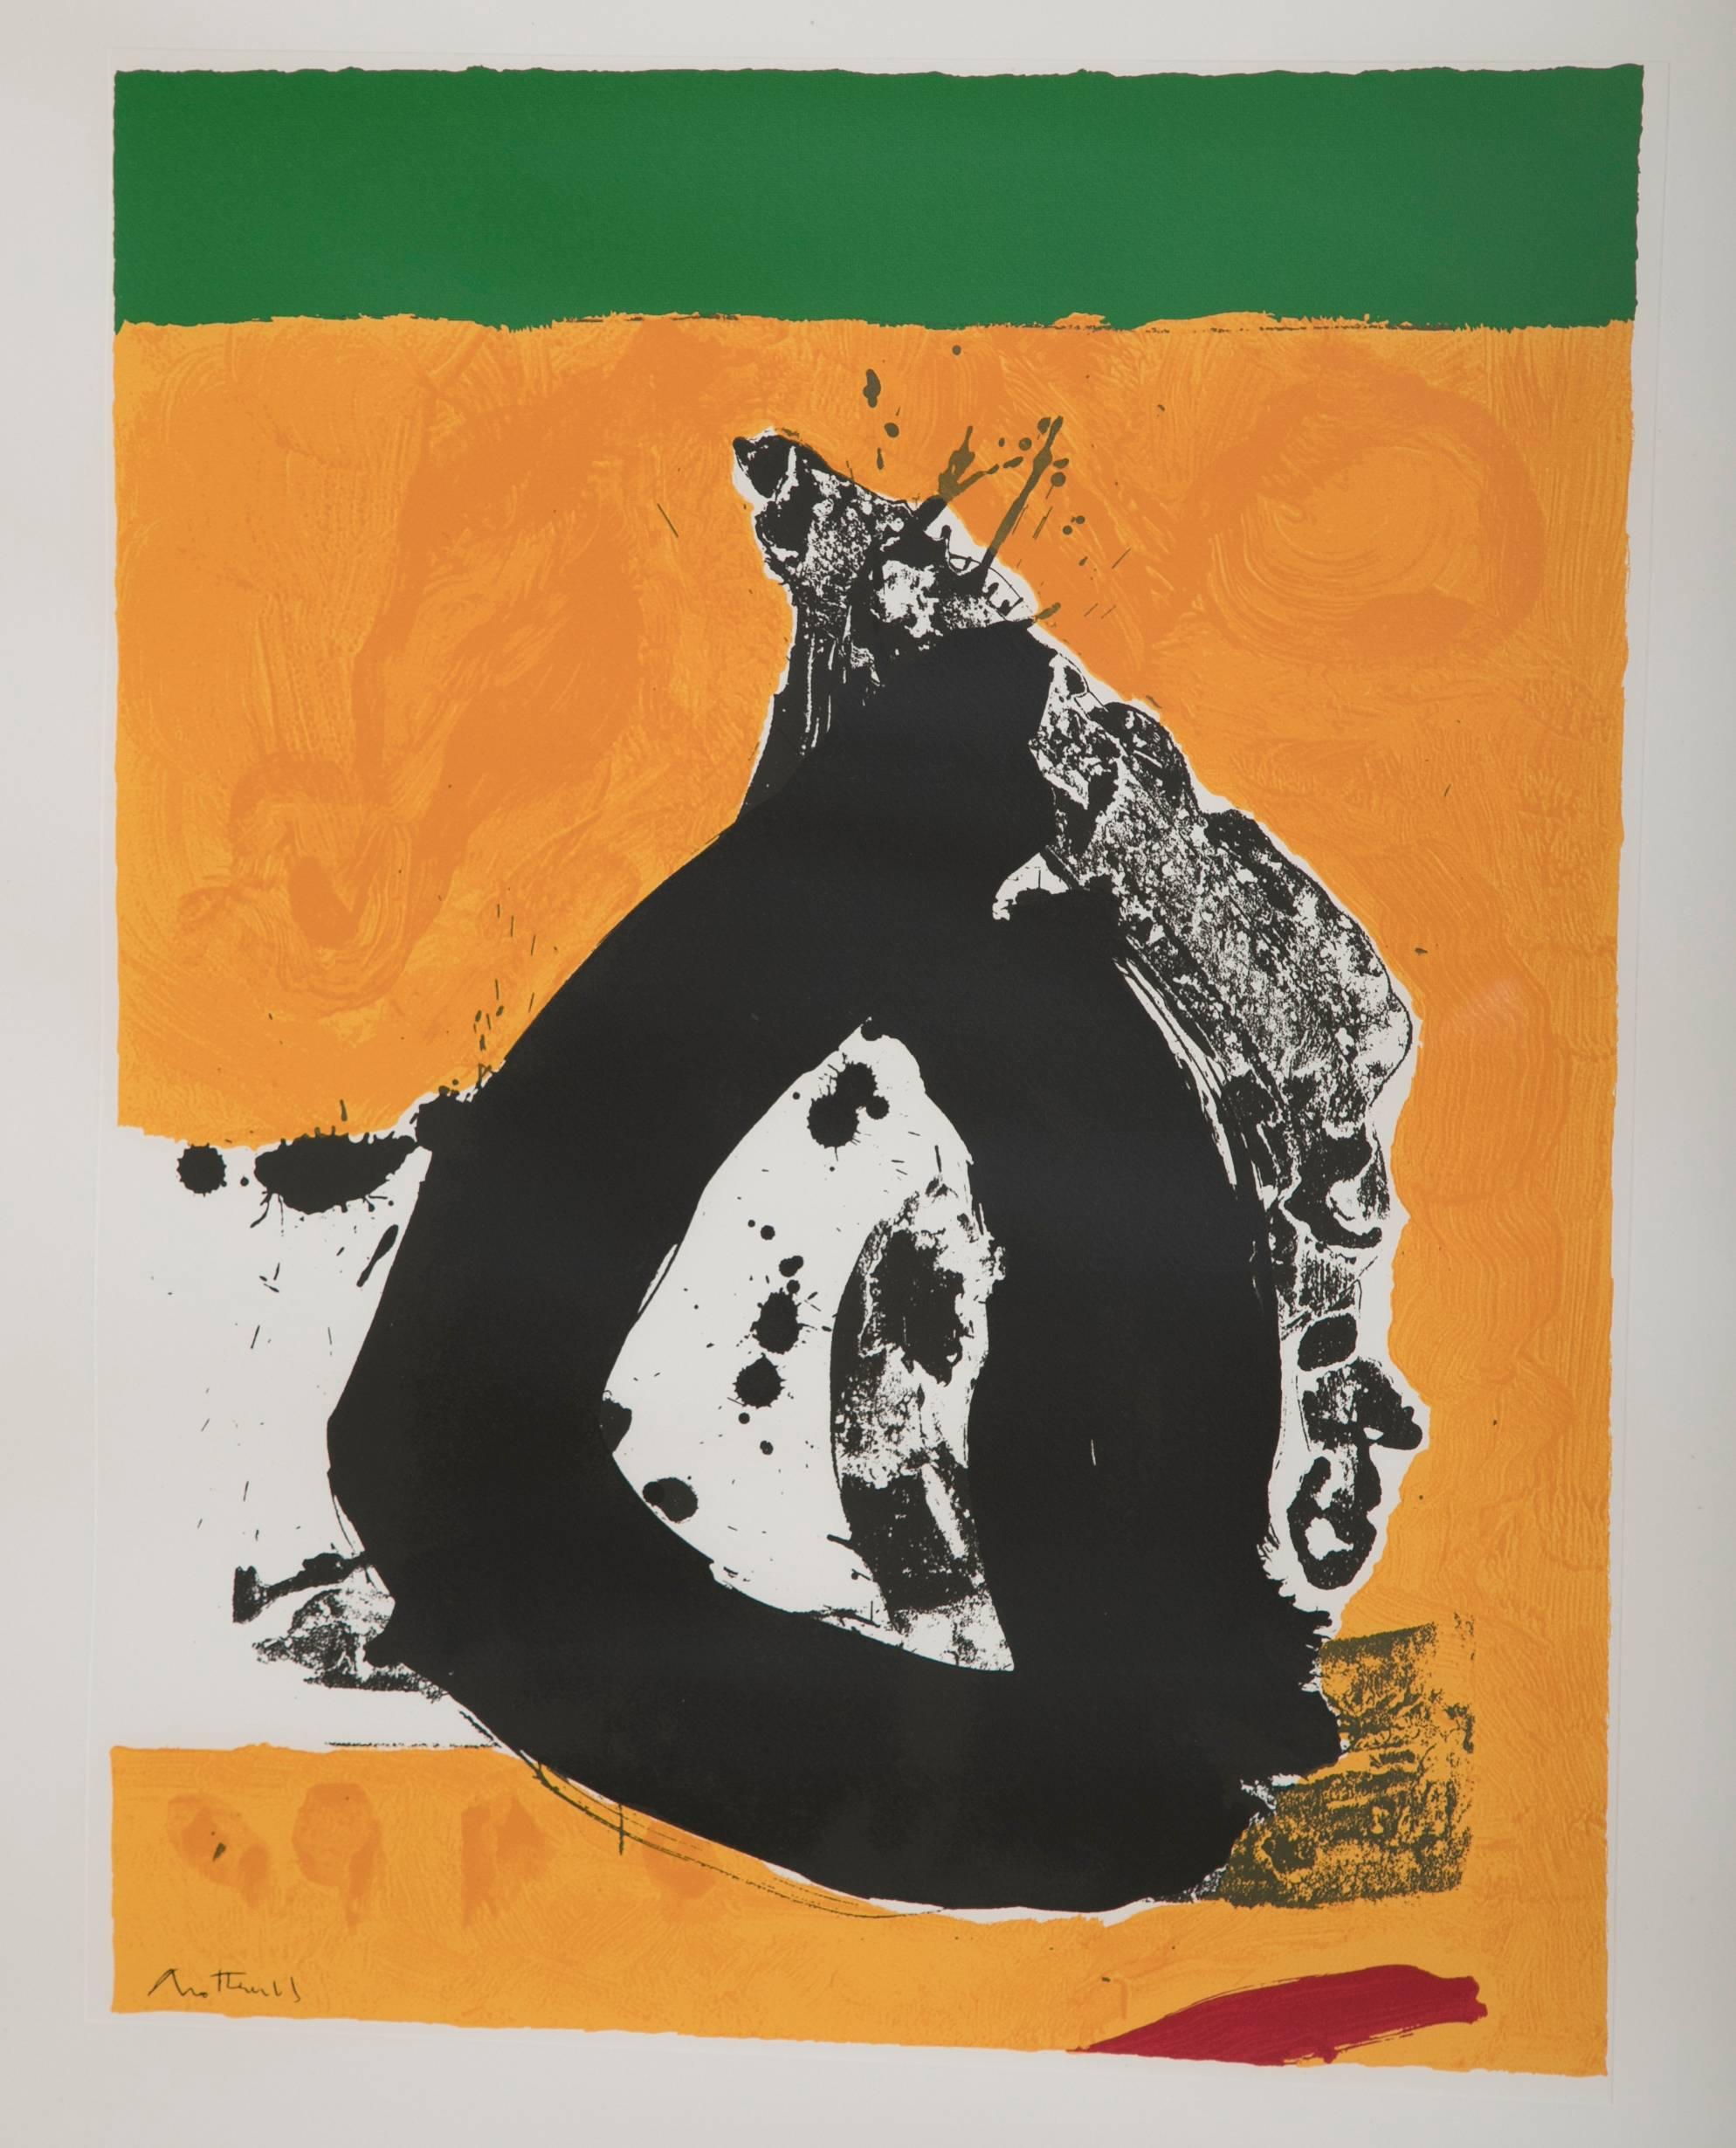 The Basque Suite: Untitled, 1971, signed and numbered 105/150 silkscreen by Robert Motherwell (American, 1915-1991).